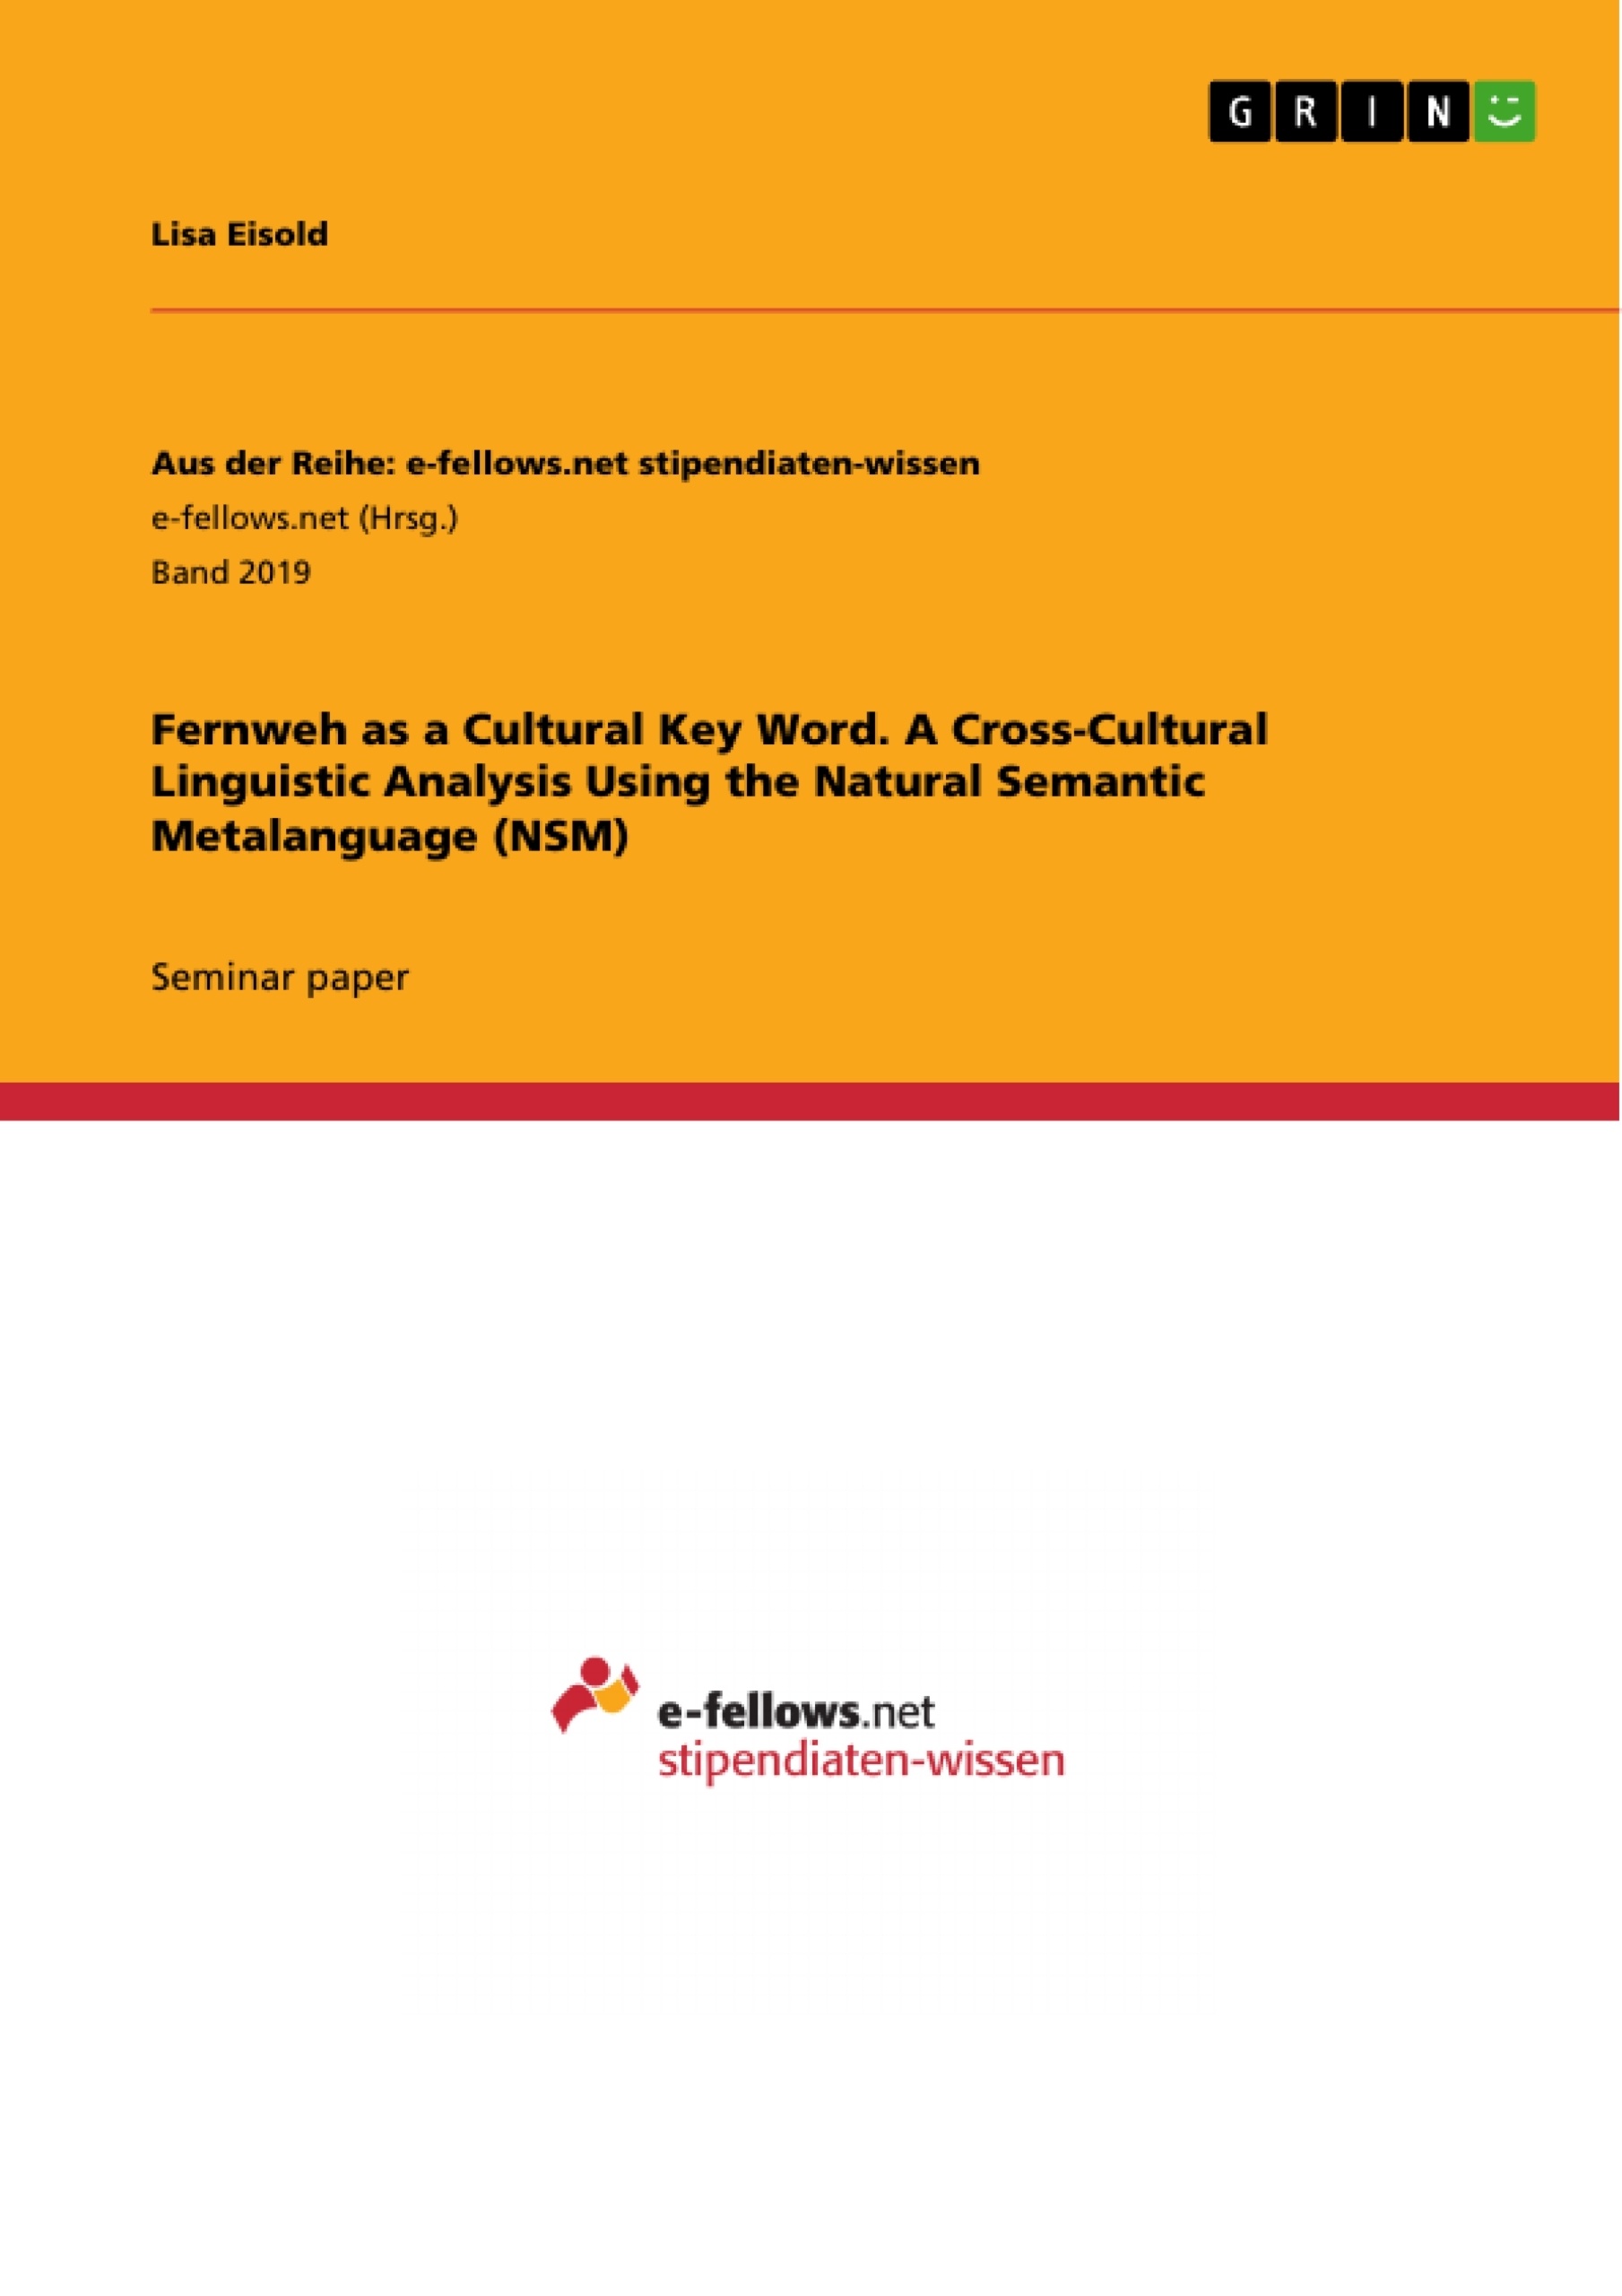 Titre: Fernweh as a Cultural Key Word. A Cross-Cultural Linguistic Analysis Using the Natural Semantic Metalanguage (NSM)